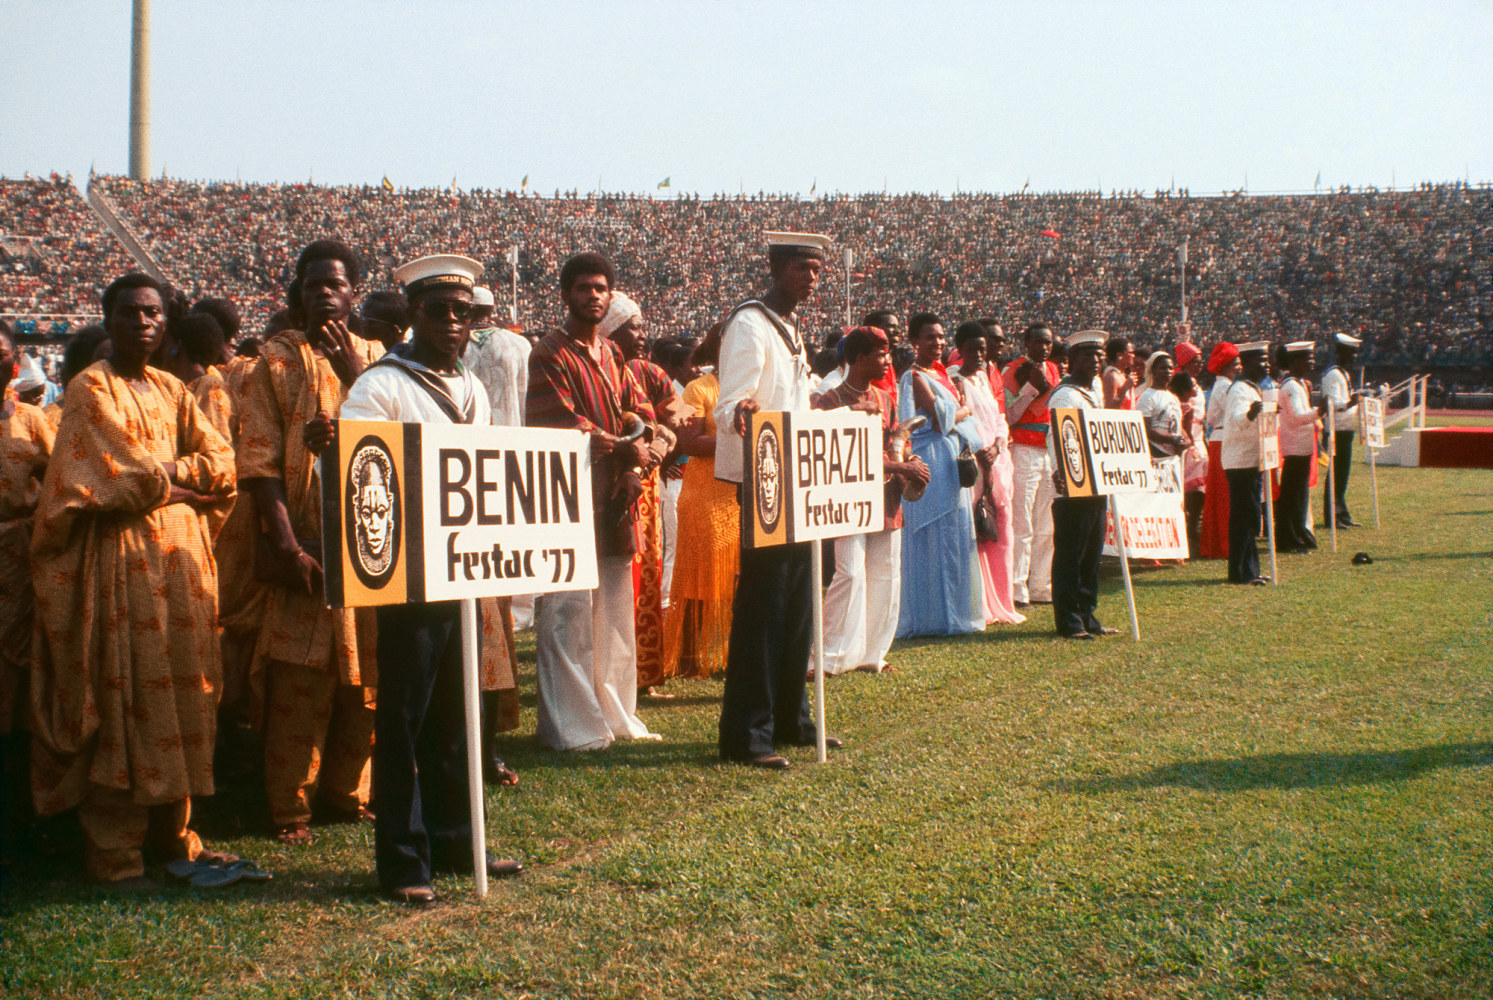 Roy Lewis (b. 1937)
FESTAC Participants Line Up Behind Their Country Name in Stadium on Open Day, 1977
Archival inkjet print on Simply Elegant Gold Fibre paper
Image: 13 3/4 x 20 inches (34.9 x 50.8 cm) Sheet: 17 x 22 inches (43.2 x 55.9 cm)
Framed: 18 5/8 &amp;times; 25 3/8 &amp;times; 1 1/2 inches (47.3 &amp;times; 64.5 &amp;times; 3.8 cm)
Edition of 5, printed 2023